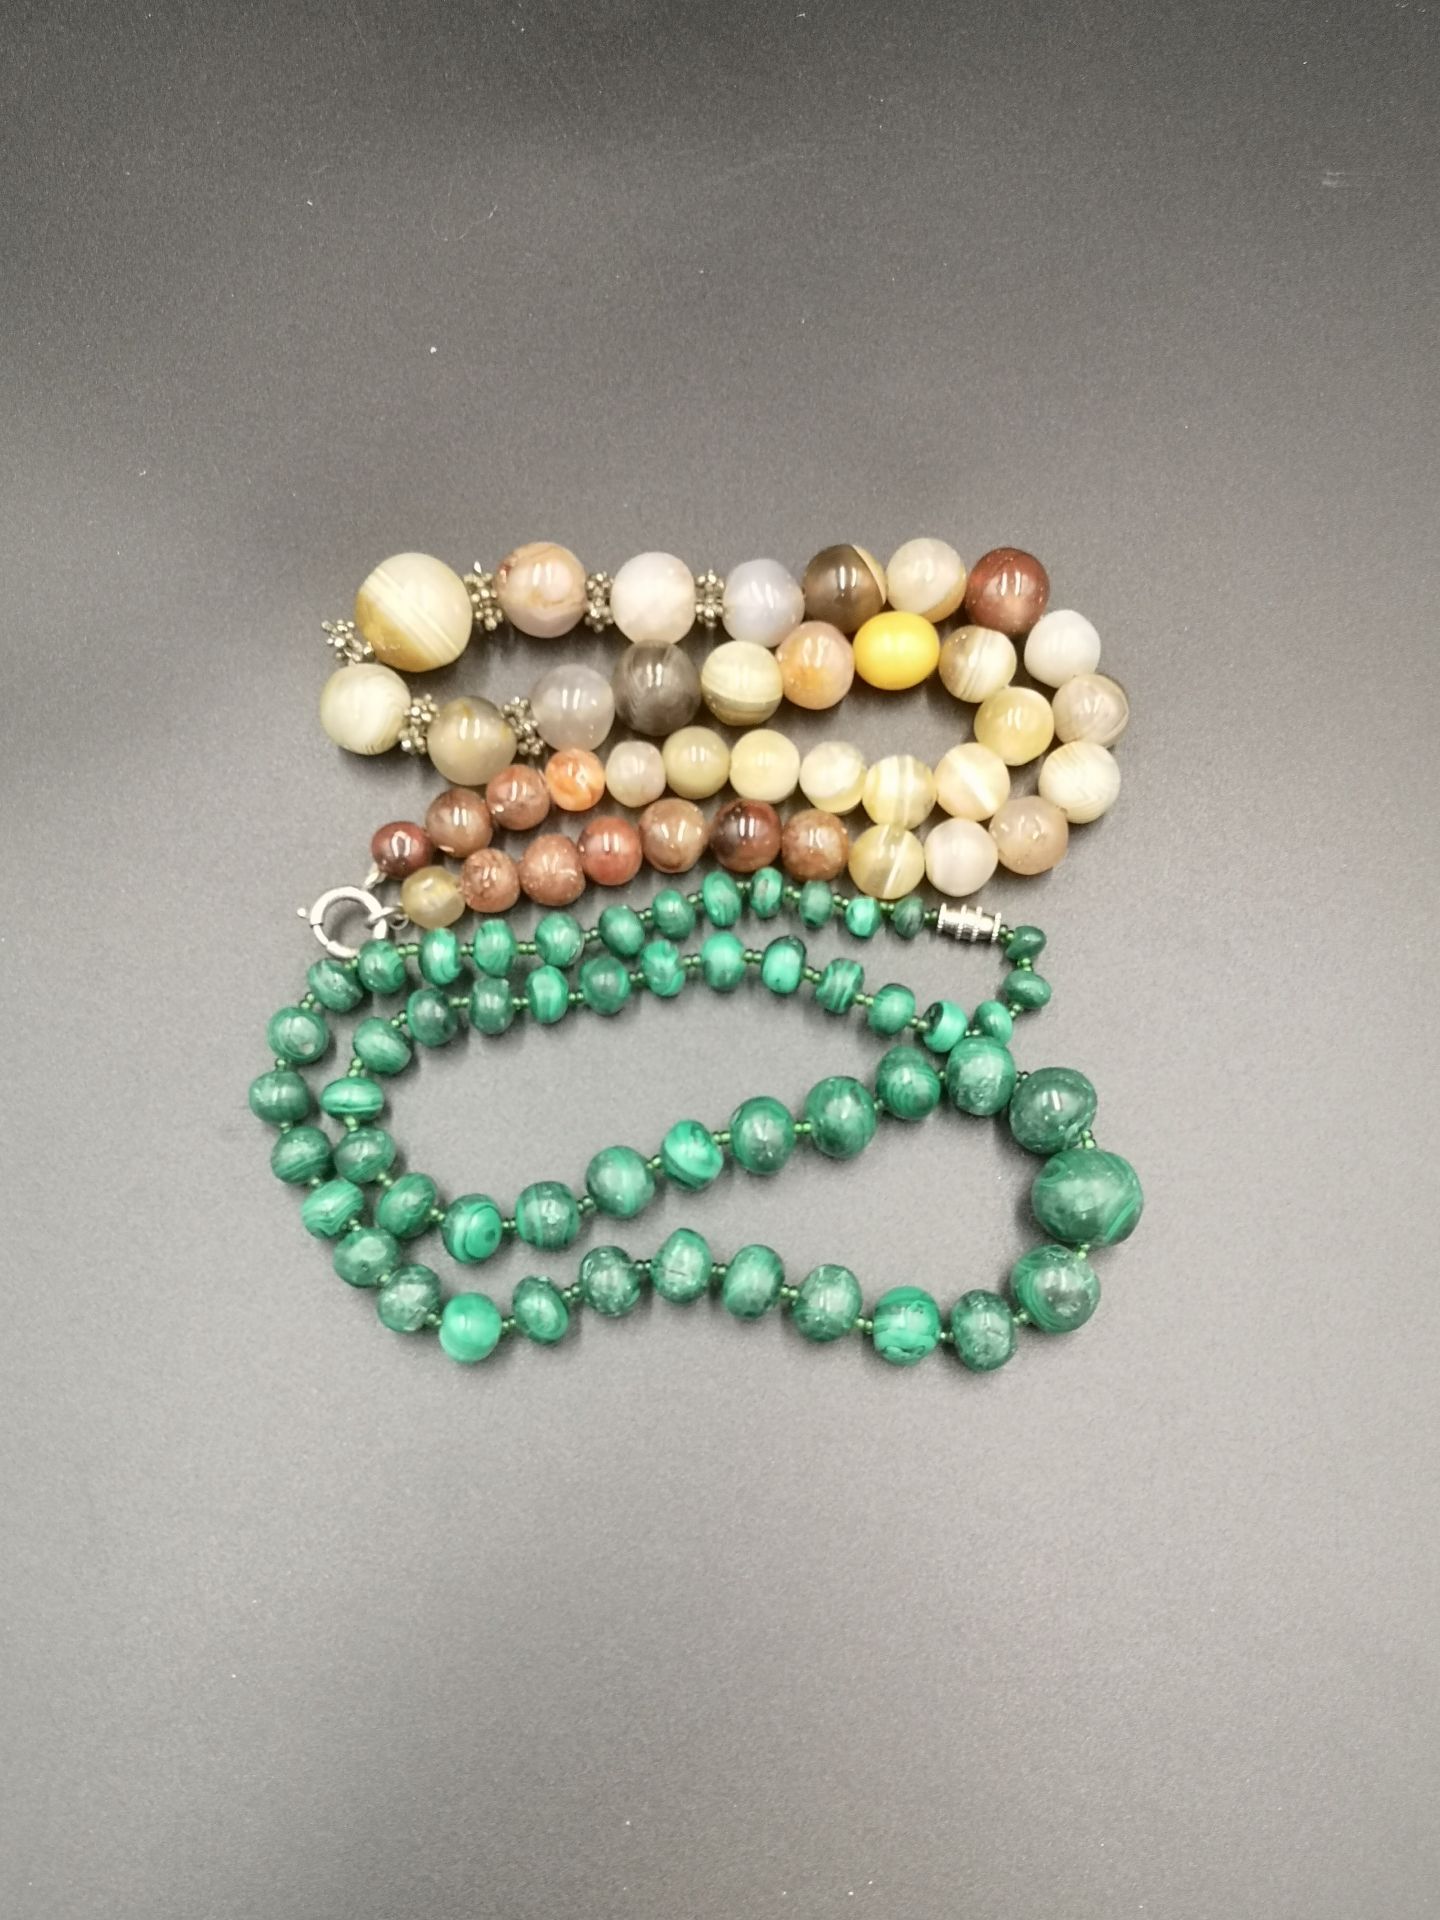 Malachite necklace together with an onyx necklace - Image 6 of 6